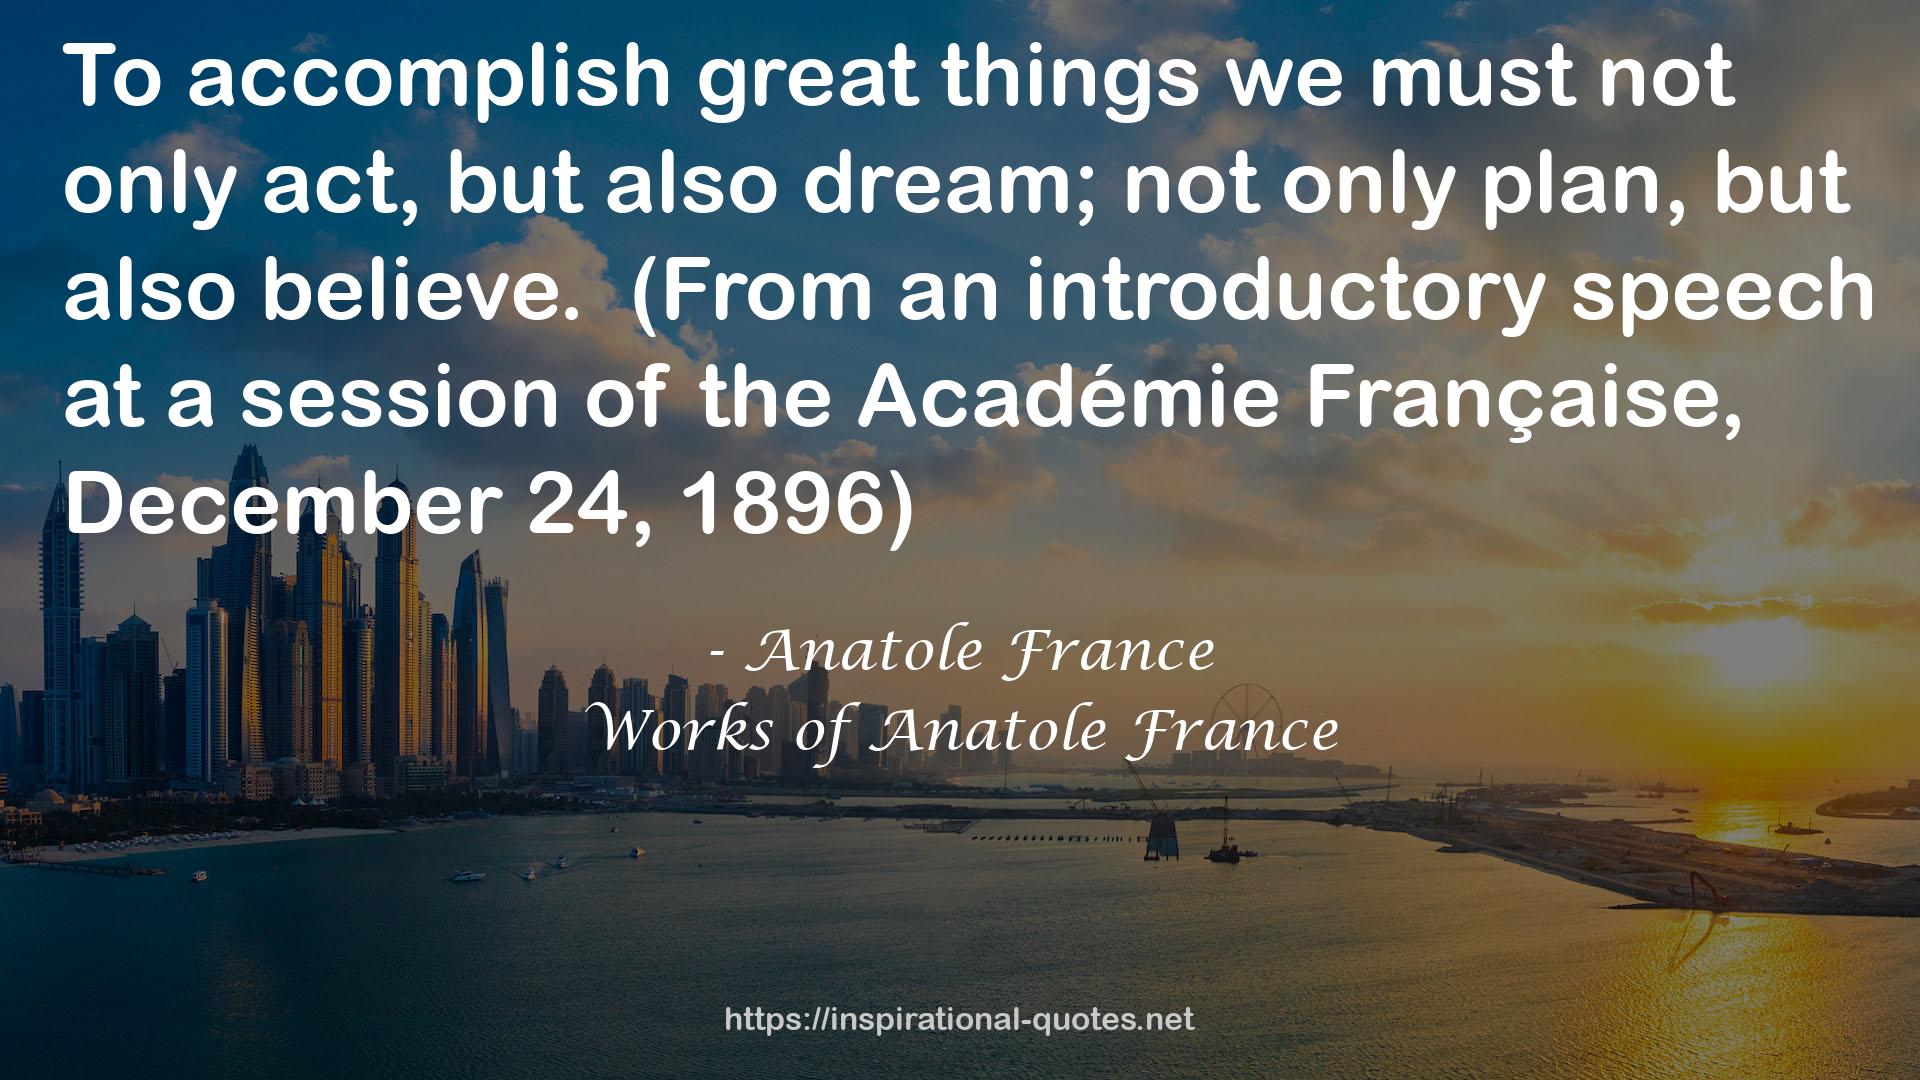 Works of Anatole France QUOTES